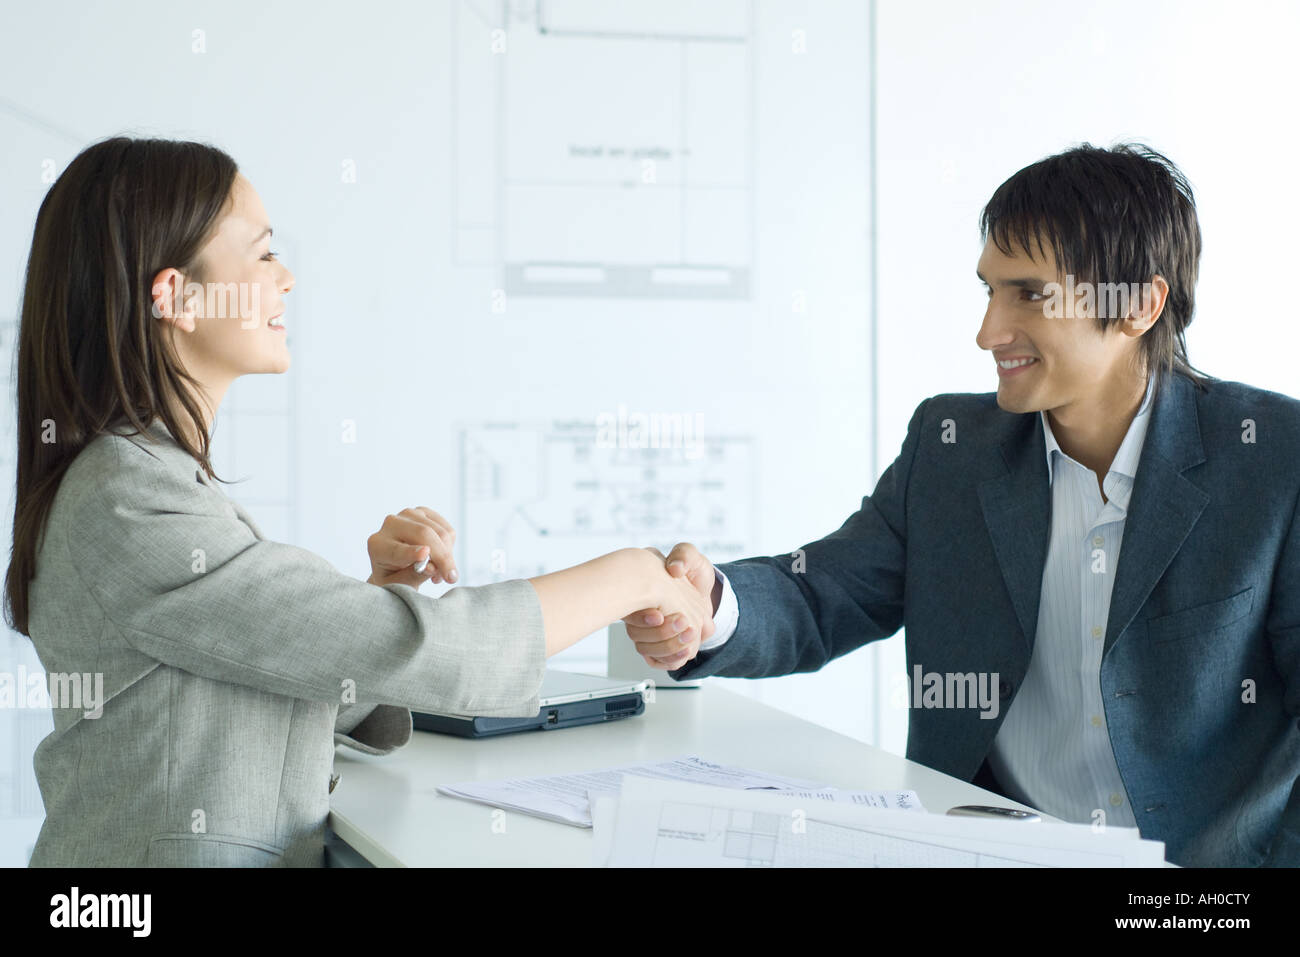 Woman and man shaking hands across table in architect firm Stock Photo